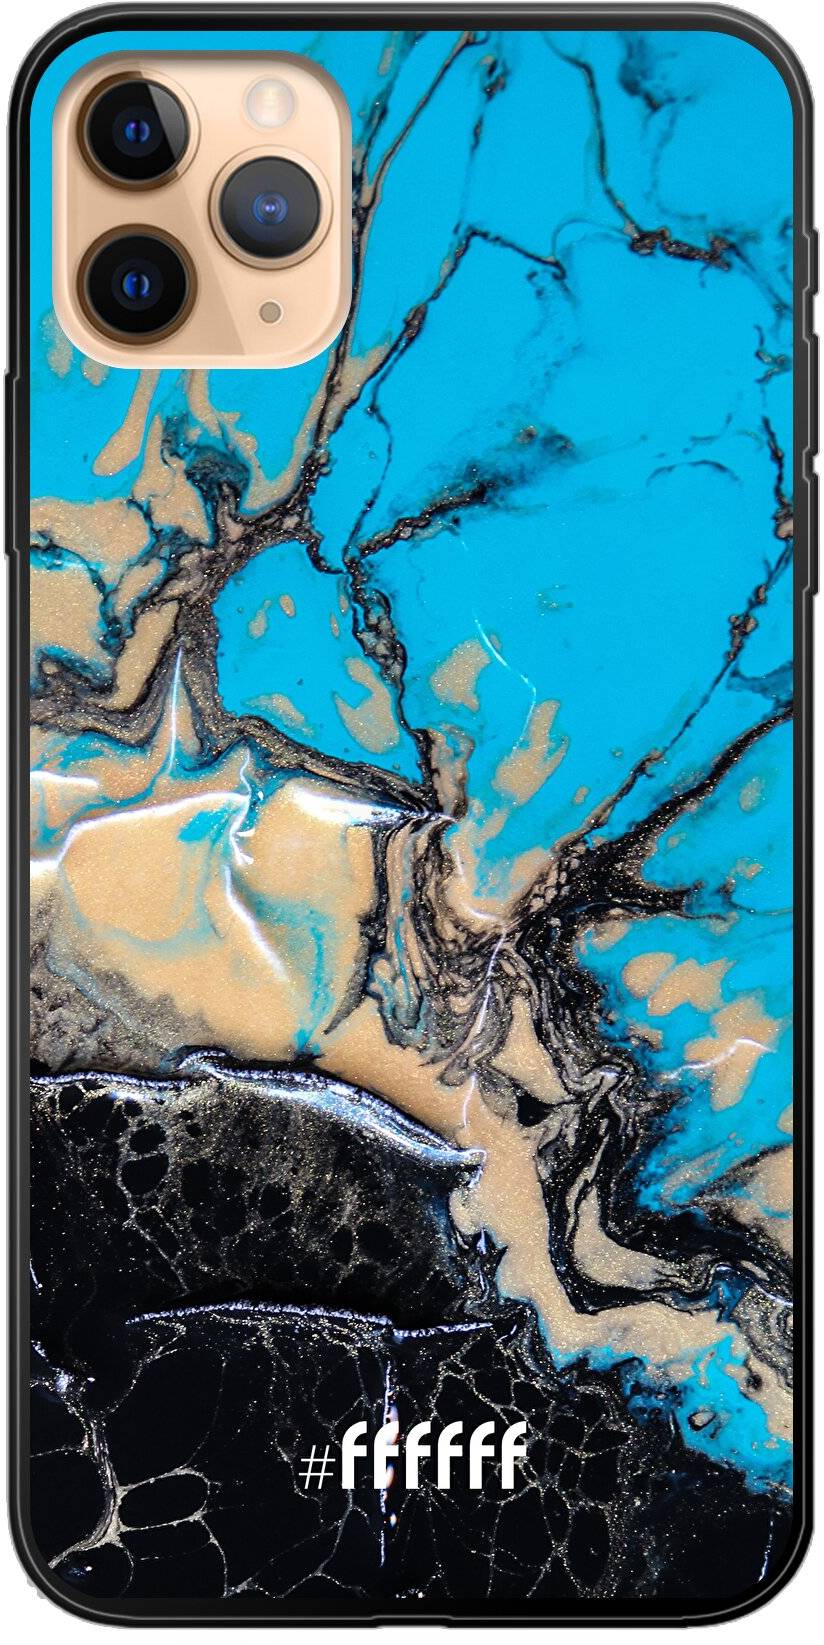 Blue meets Dark Marble iPhone 11 Pro Max